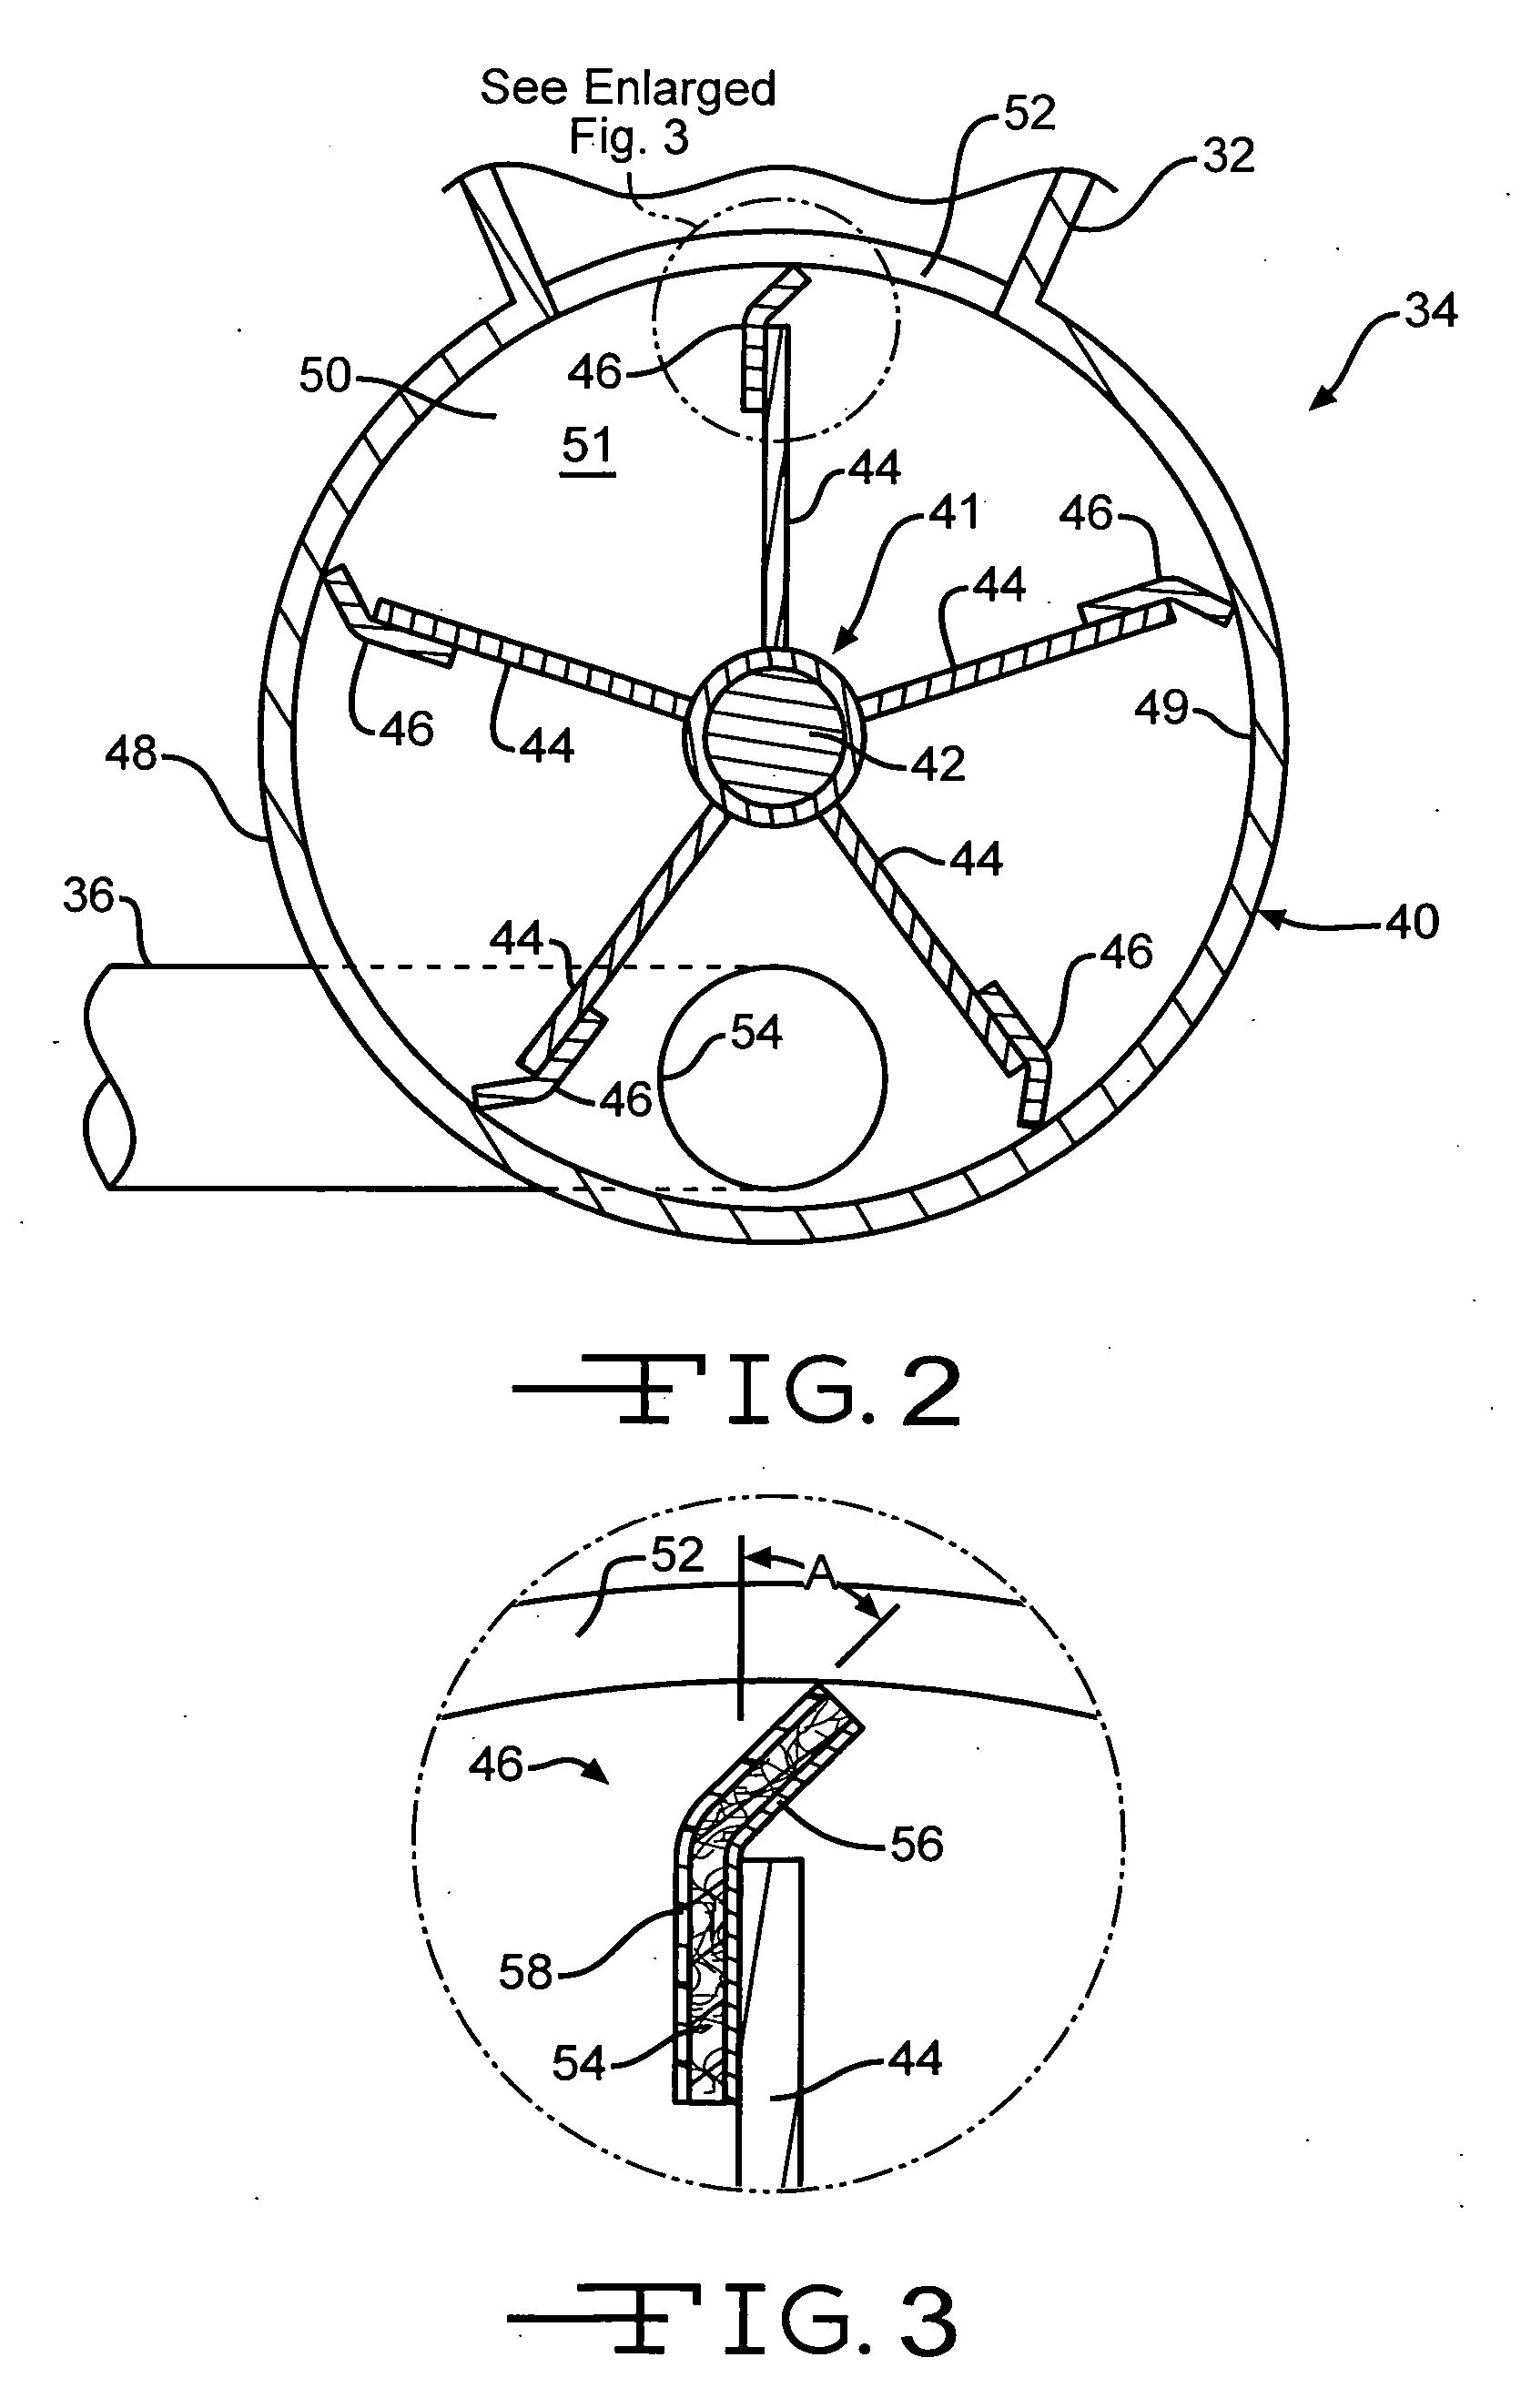 Rotary valve for handling solid particulate material